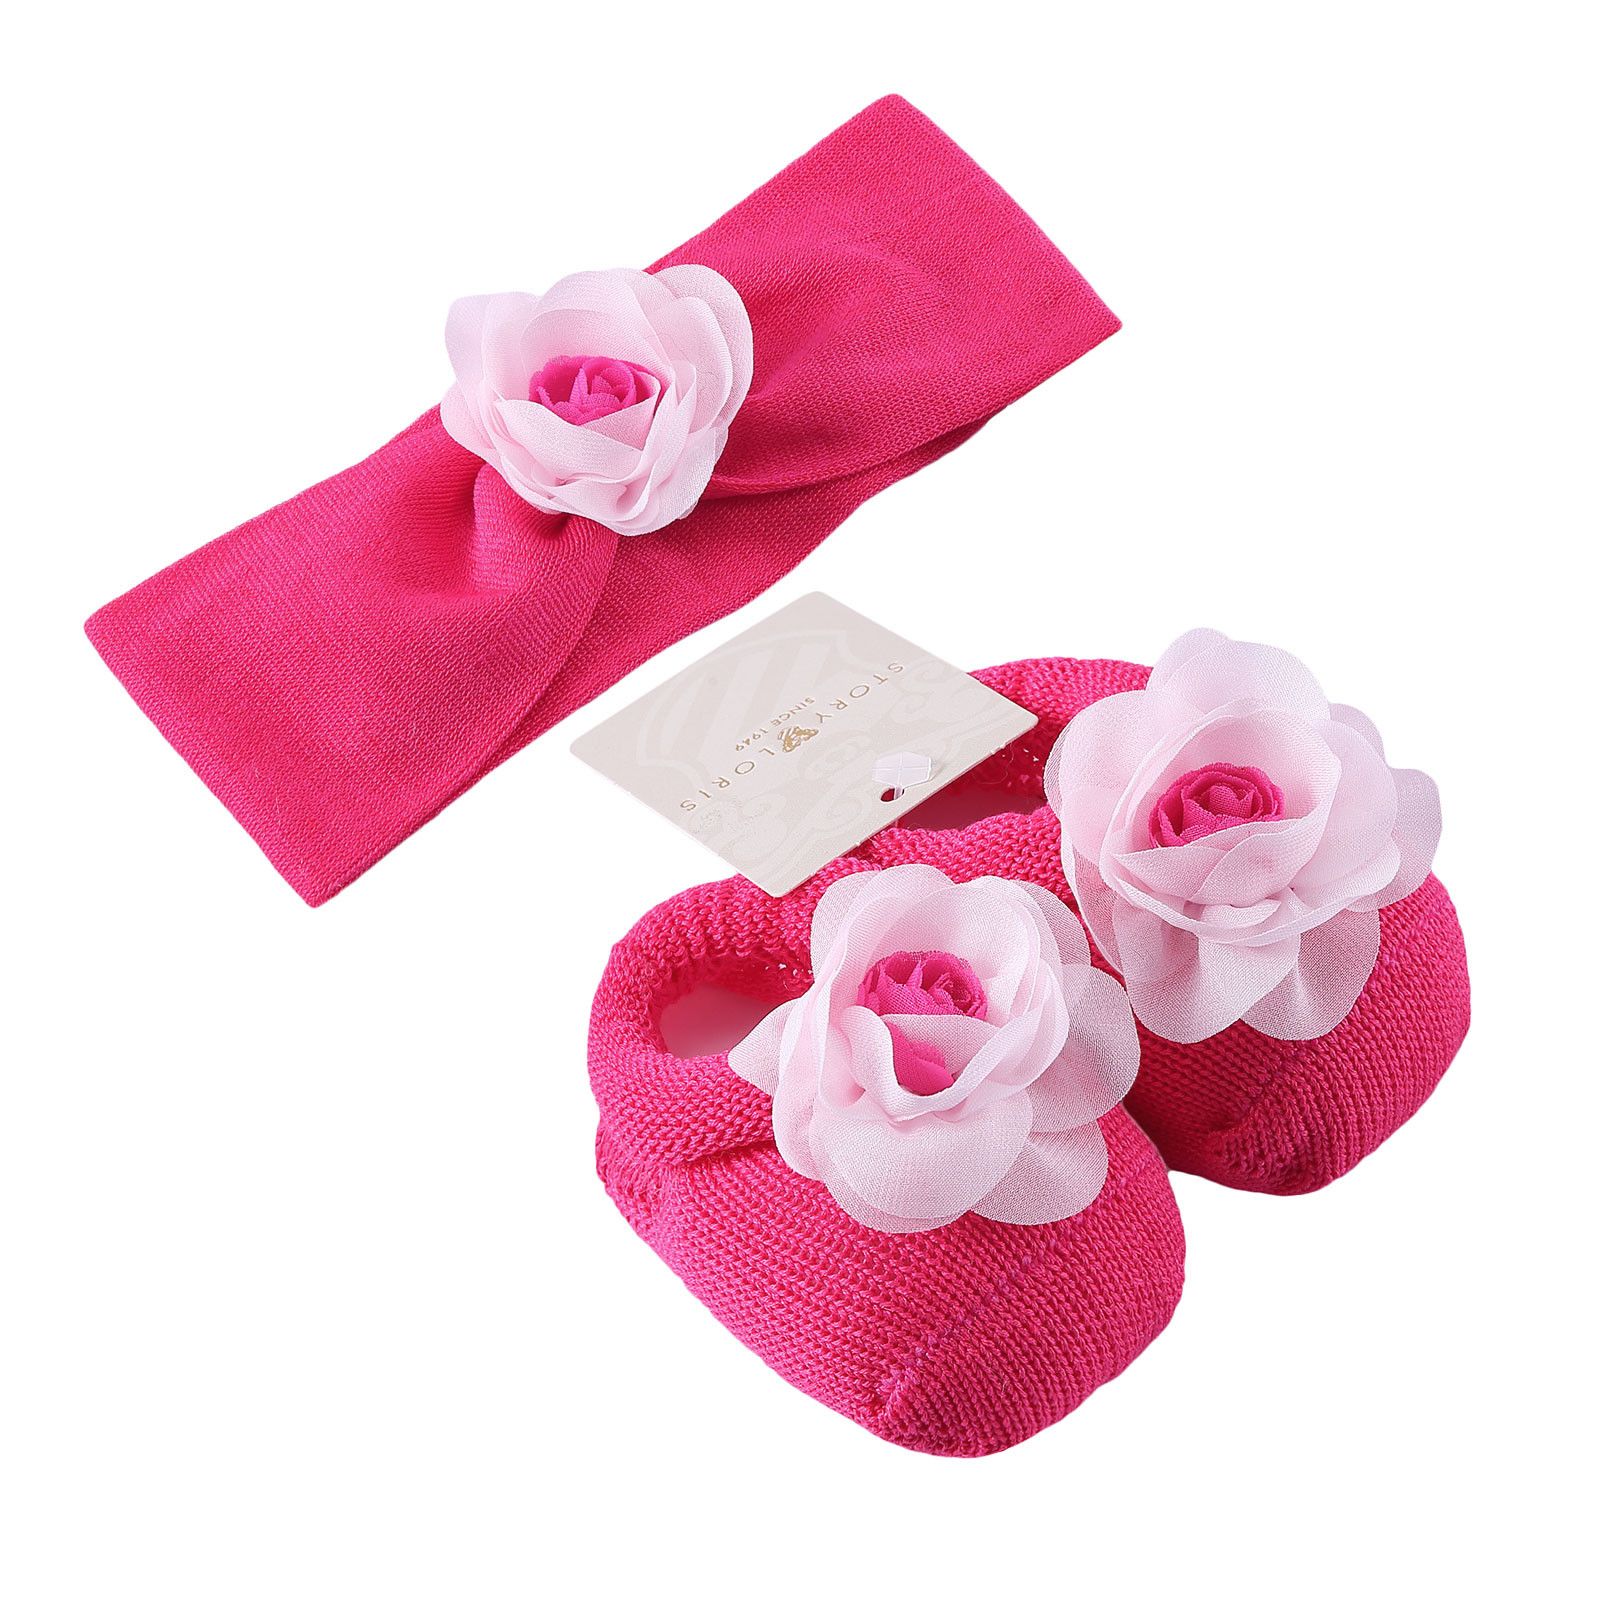 Baby Red Knitted Cotton Rose Shoes&Hair Band Gift Set - CÉMAROSE | Children's Fashion Store - 1